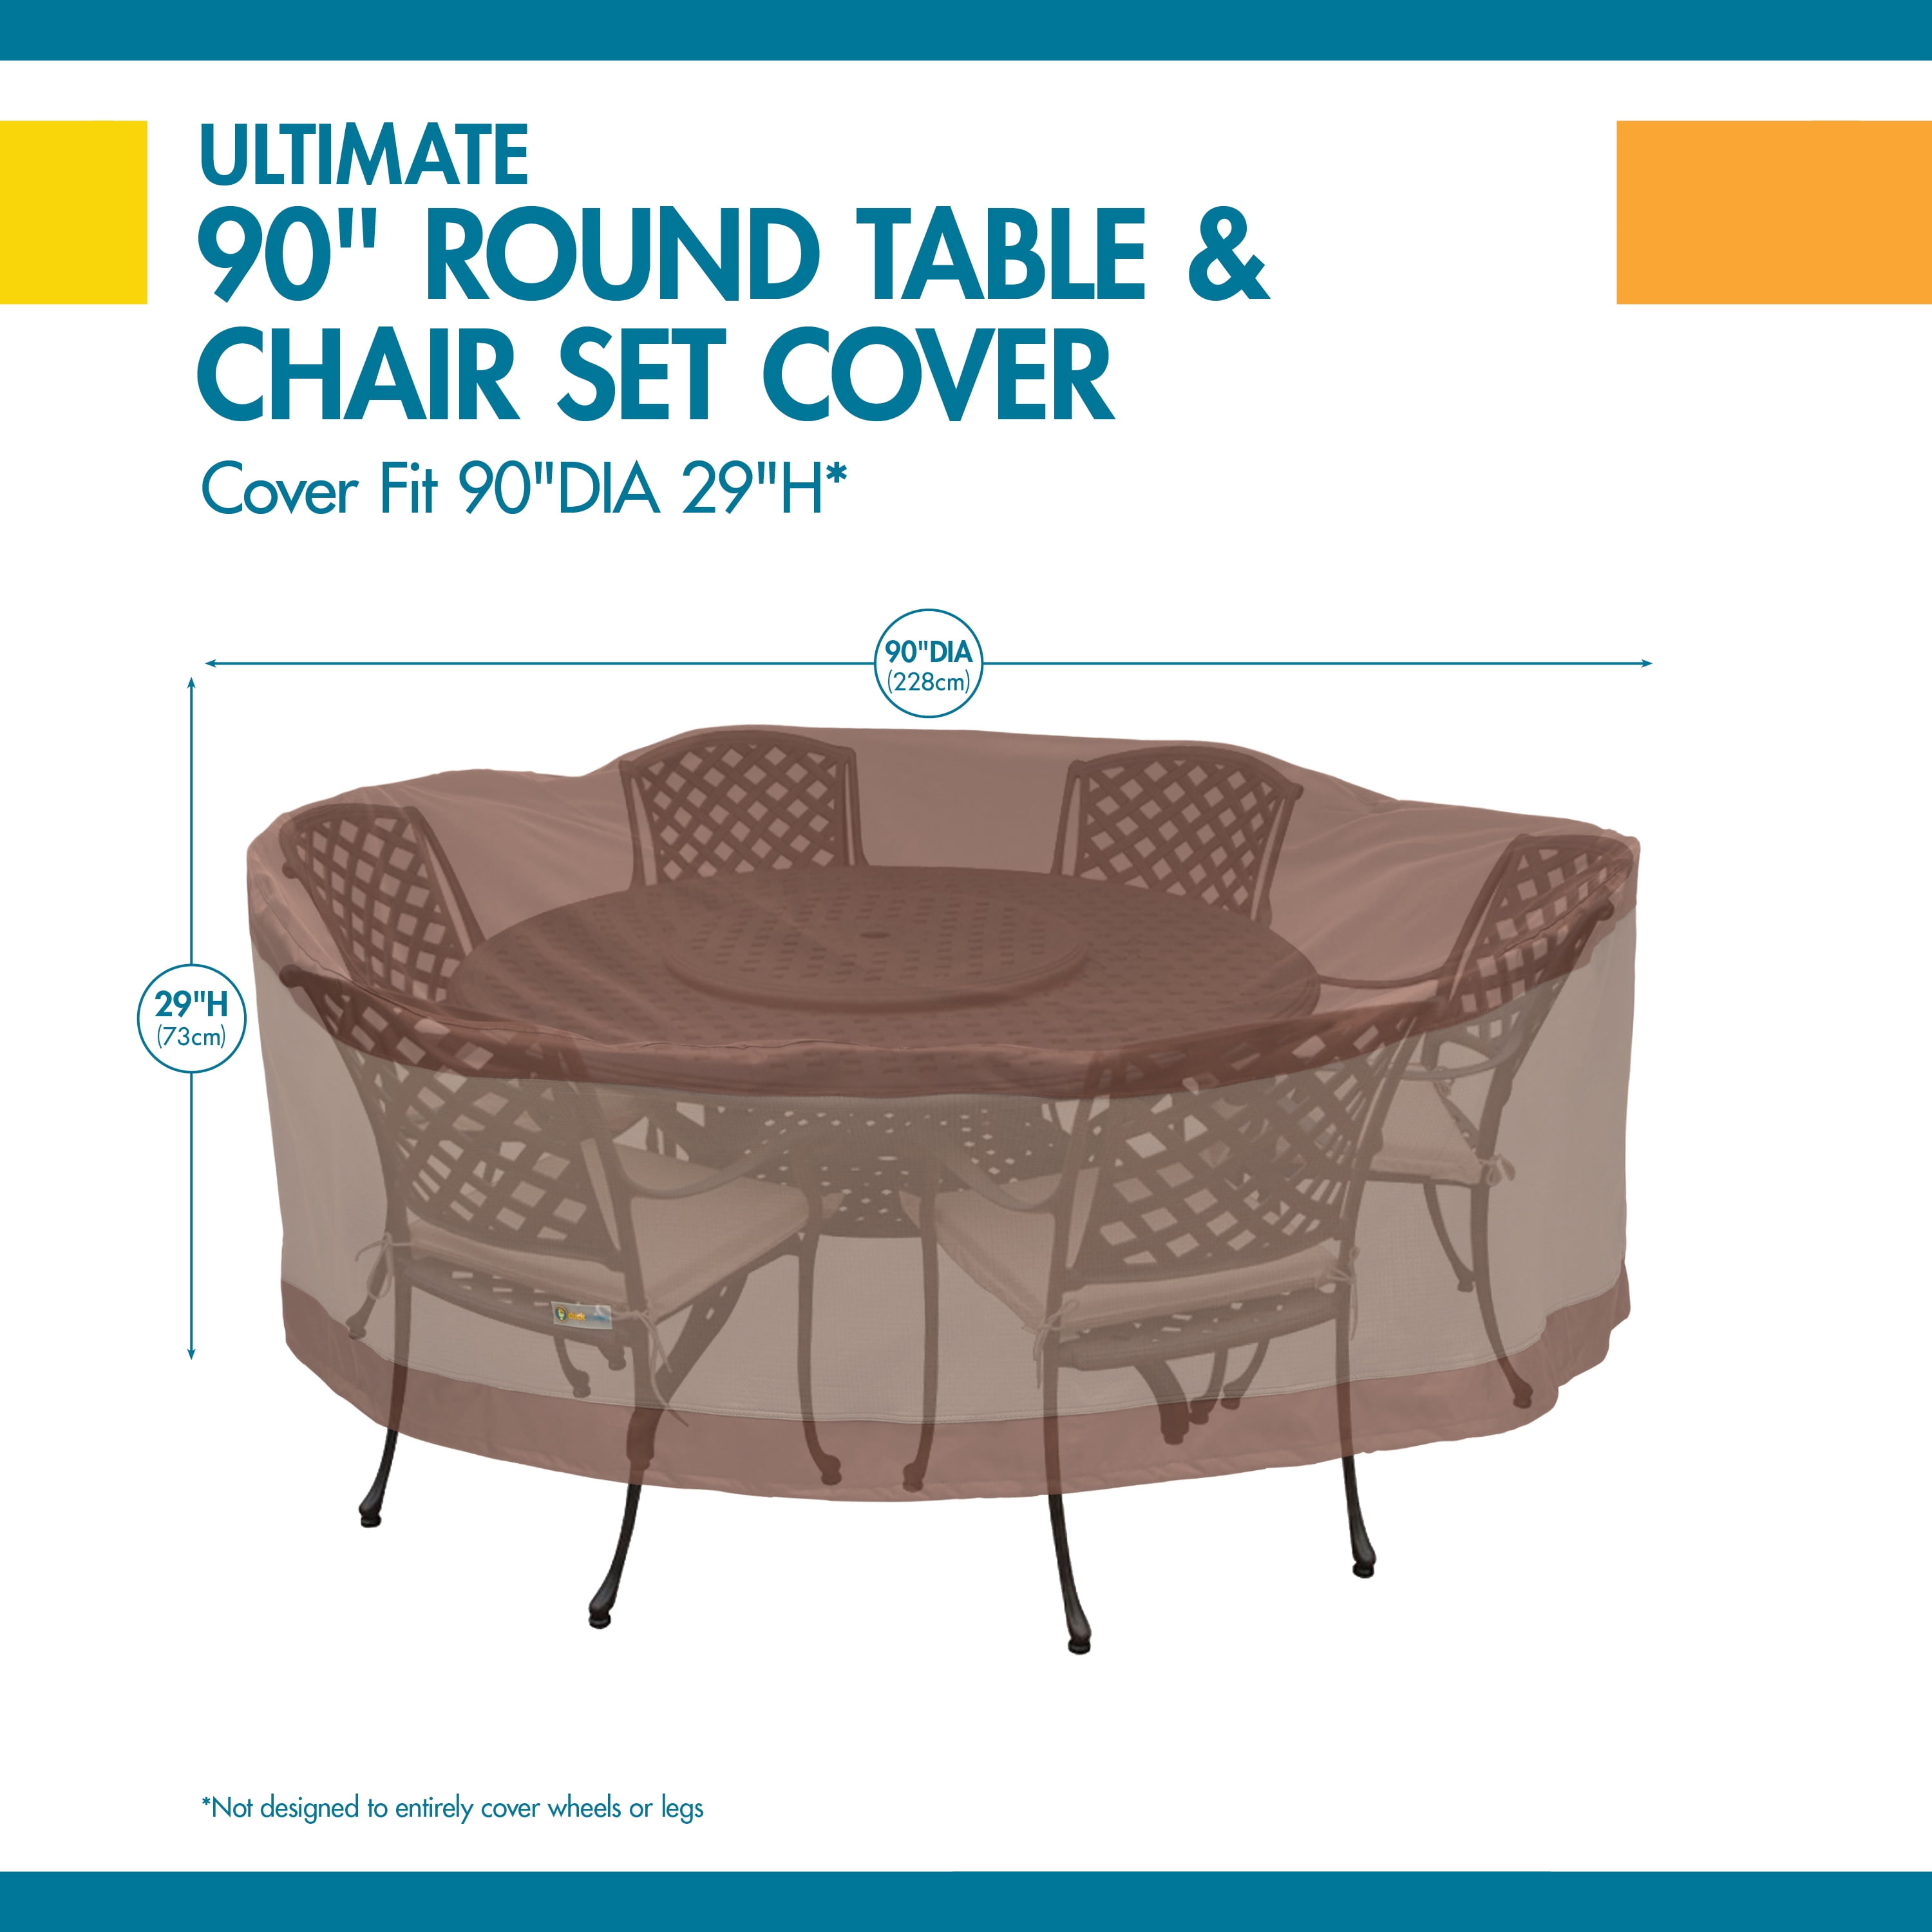 Duck Covers Ultimate Waterproof 108 Inch Round Patio Table & Chair Set Cover